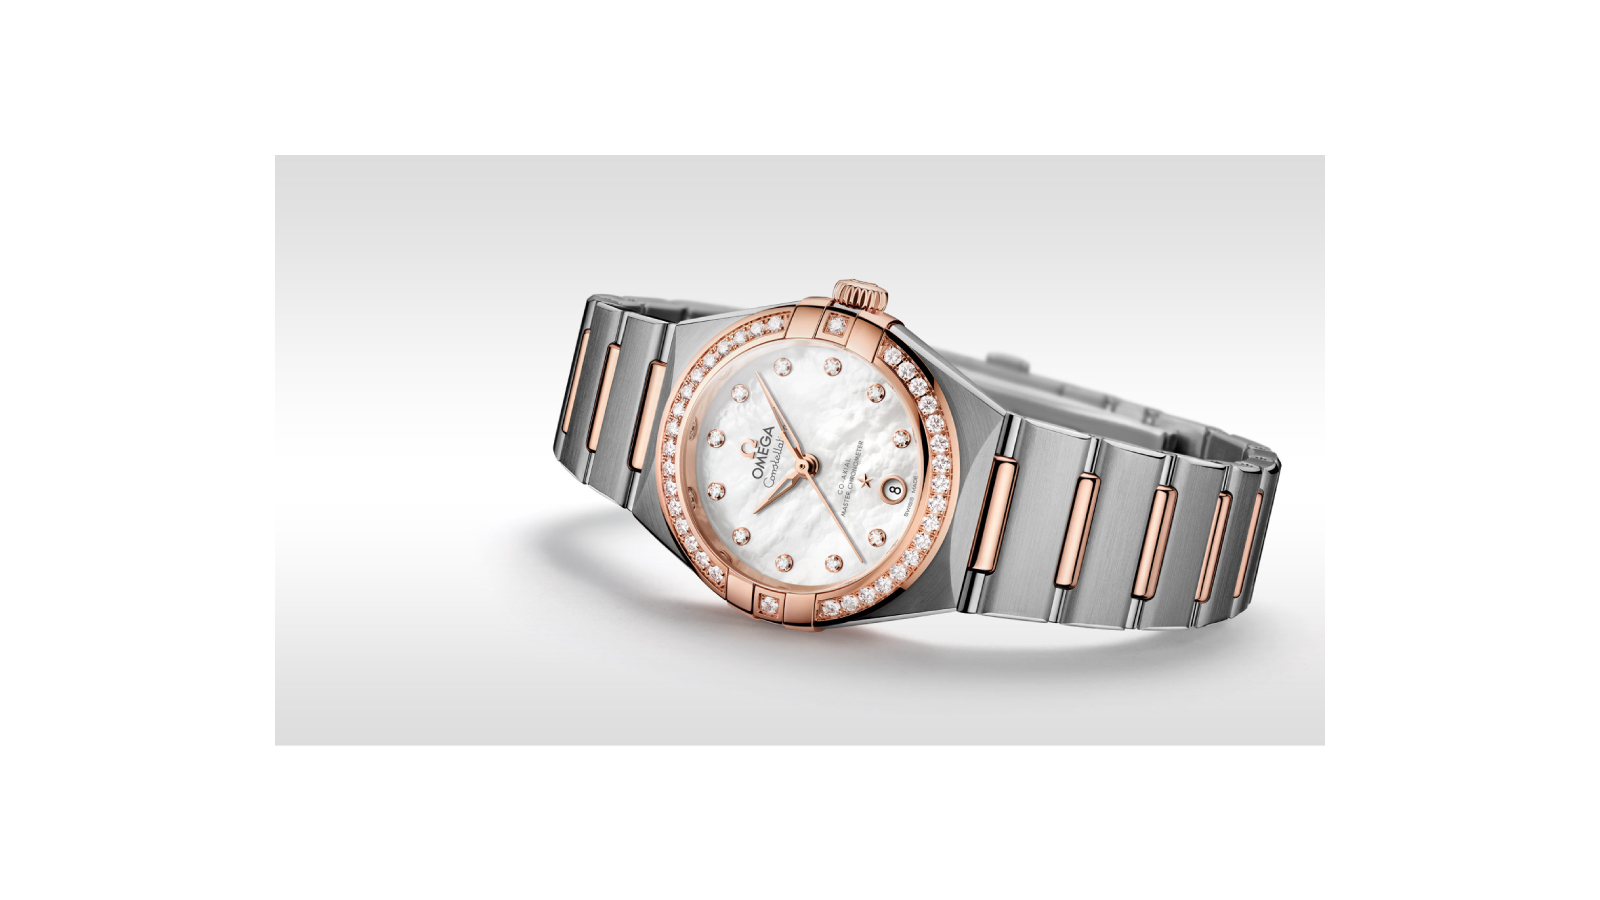 Ladies' watch  OMEGA, Constellation Co Axial Master Chronometer / 29mm, SKU: 131.25.29.20.55.001 | watchapproach.com